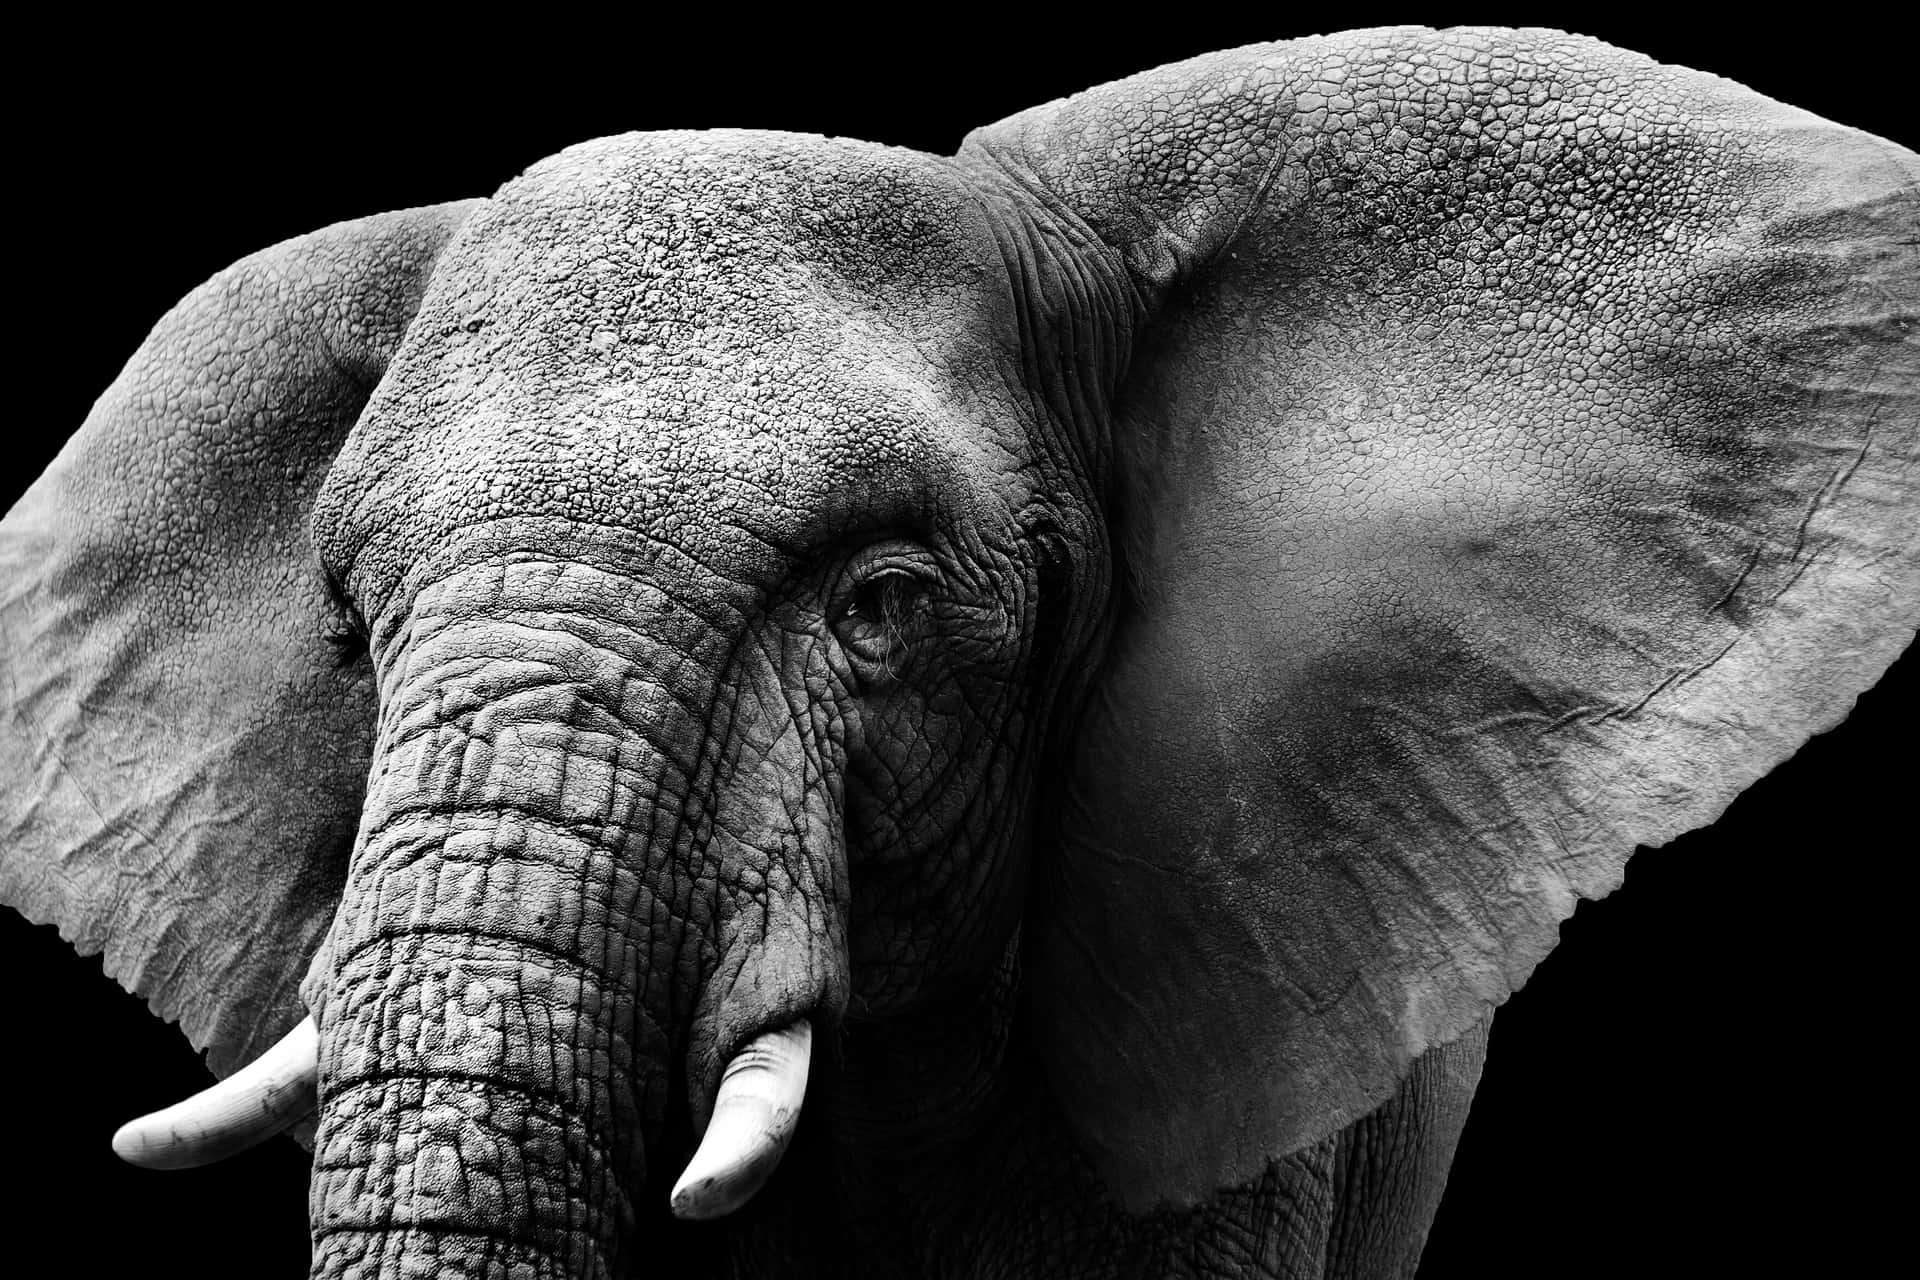 Stay productive with the Elephant Laptop Wallpaper